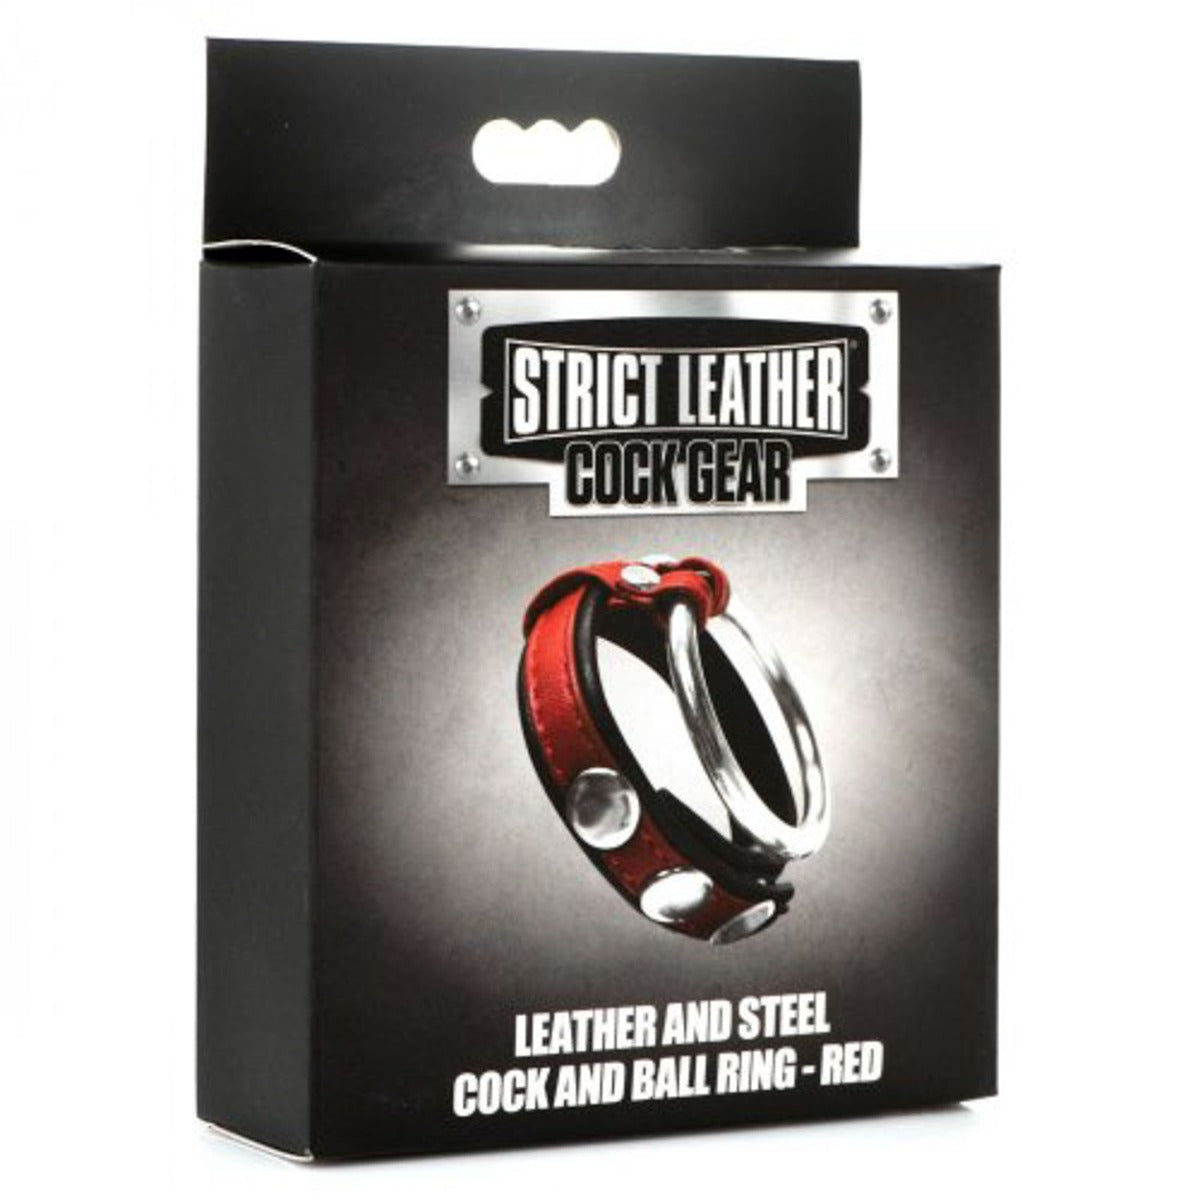 Strict Leather Cock Gear Leather and Steel Cock and Ball Ring Red (8251354874095)